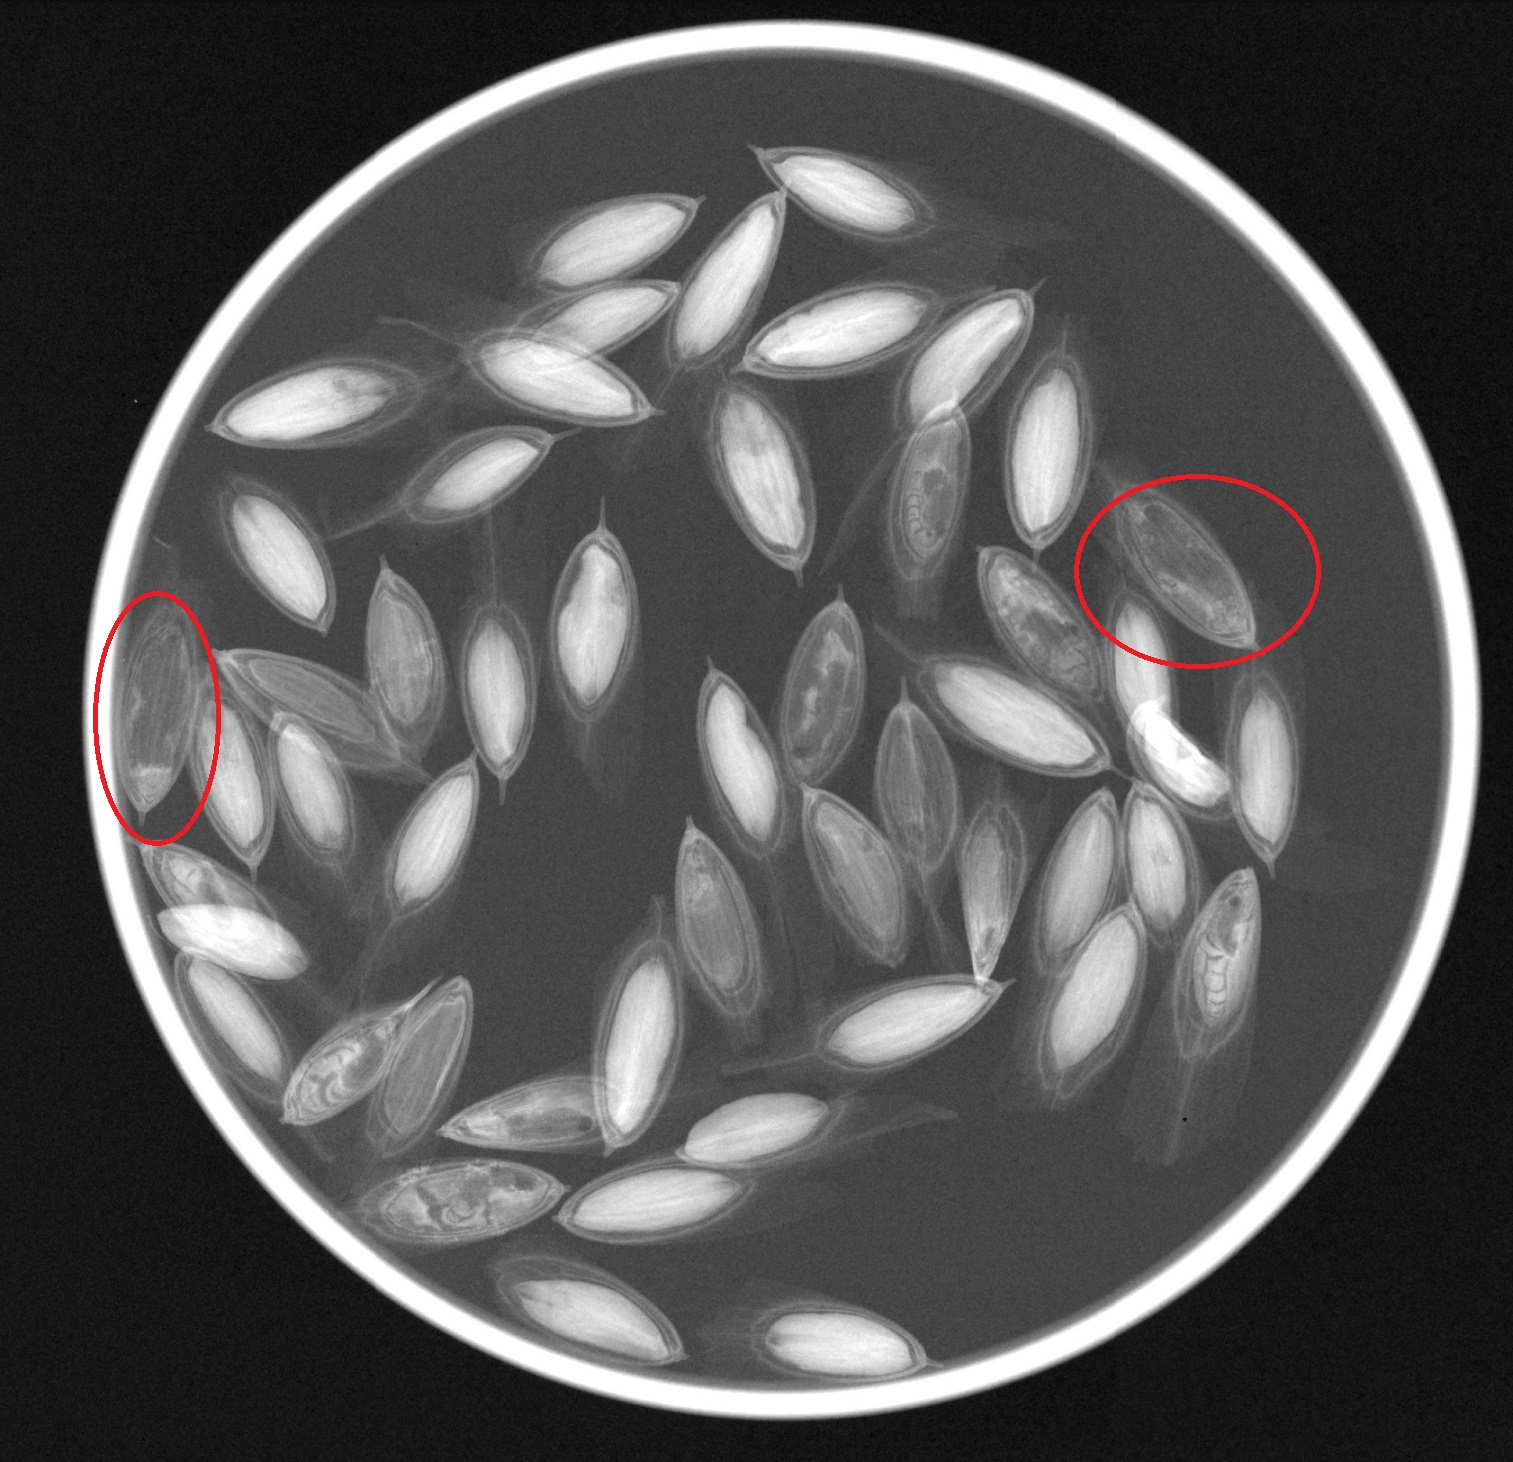 Lots of white healthy oval embryos and a few which are duller grey indicating empty seeds. Two seeds are circled red, these seeds are mostly dark grey bust have smaller lighter patched at one end